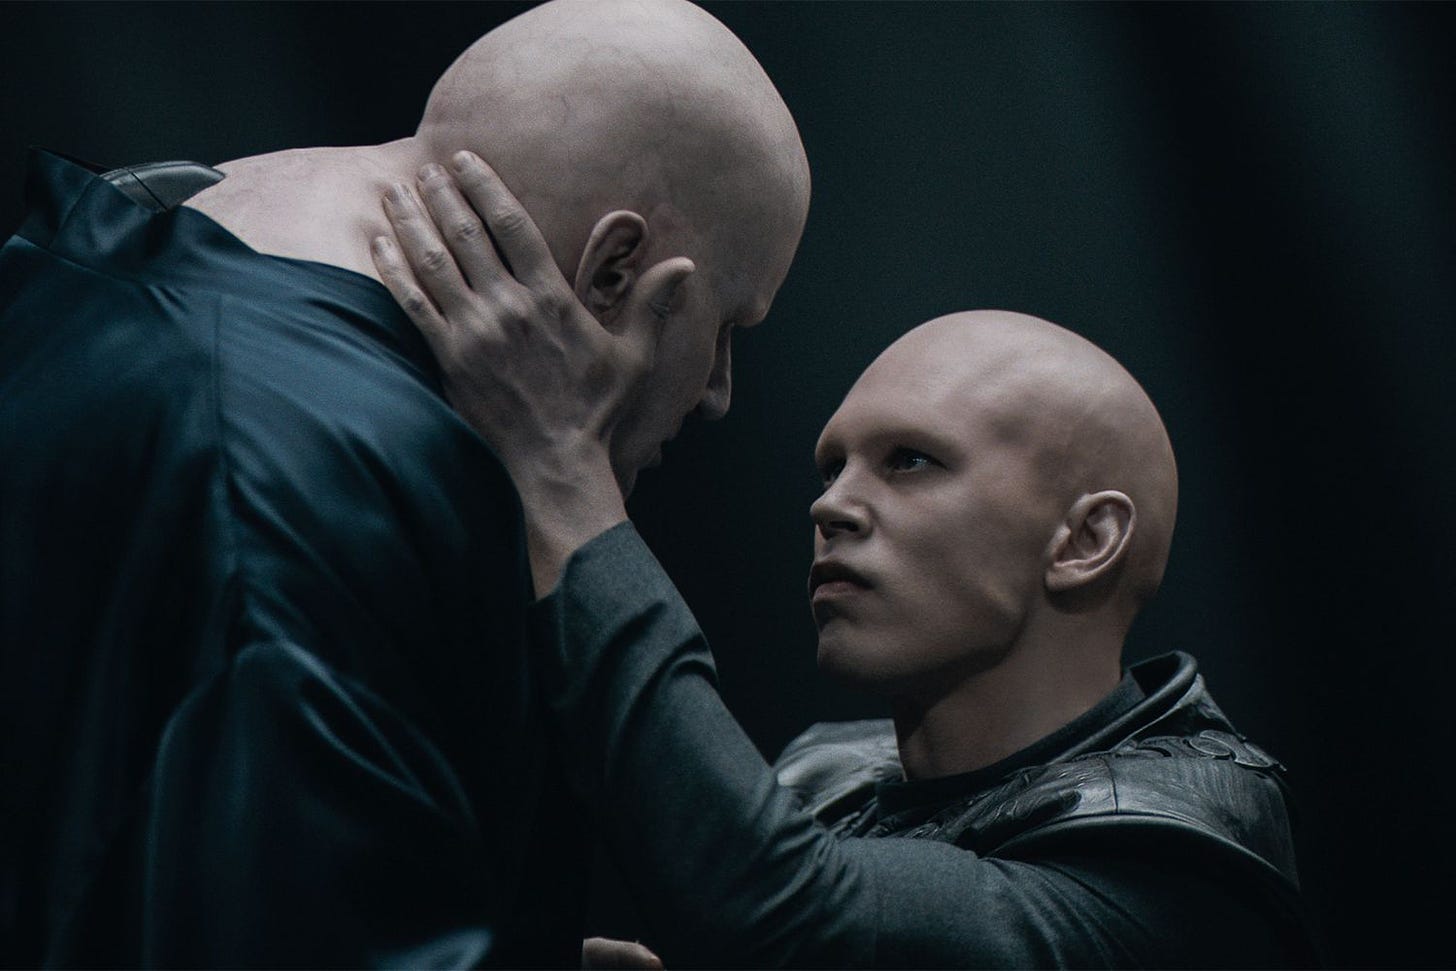 Austin Butler, very bald as Feyd Rautha, goes in for a kiss with his uncle Baron Harkonnen (also bald) in Dune: Part Two.